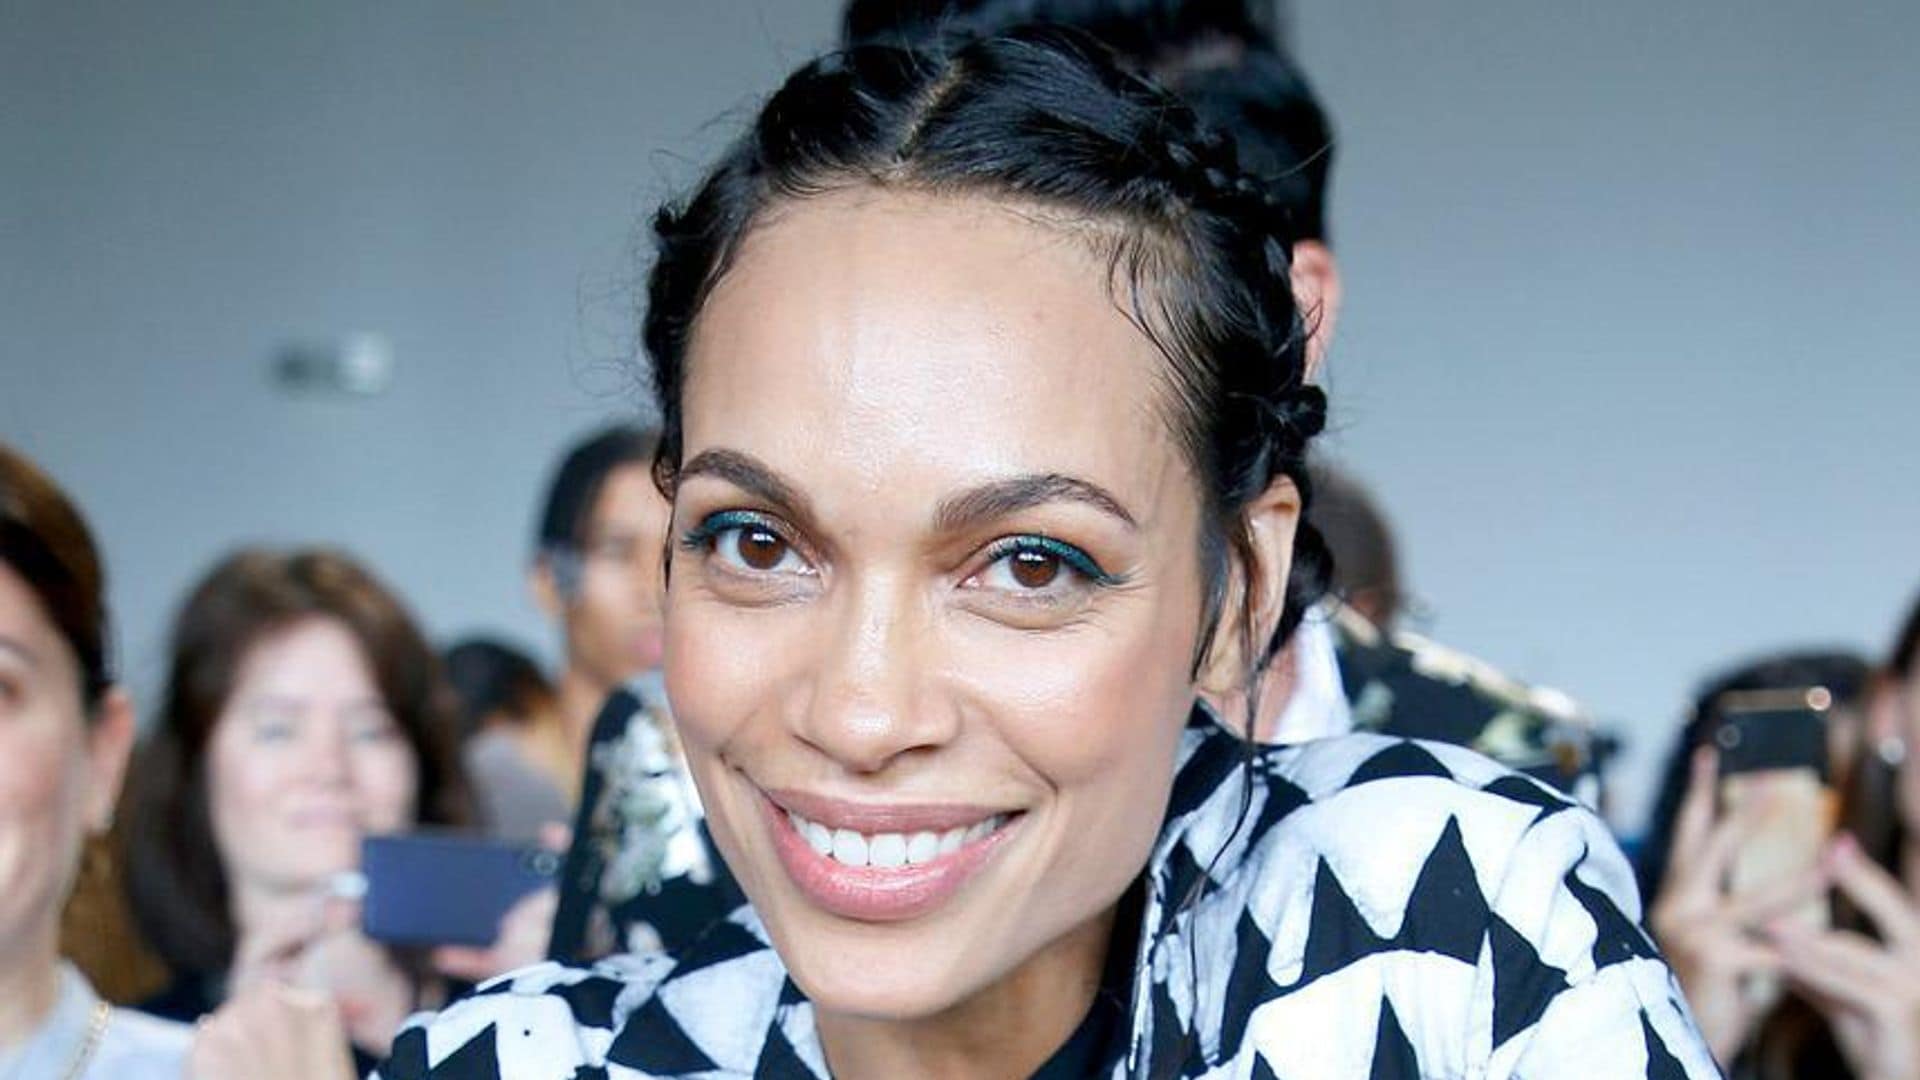 Rosario Dawson dances and lives her best life on the runway at her NYFW show